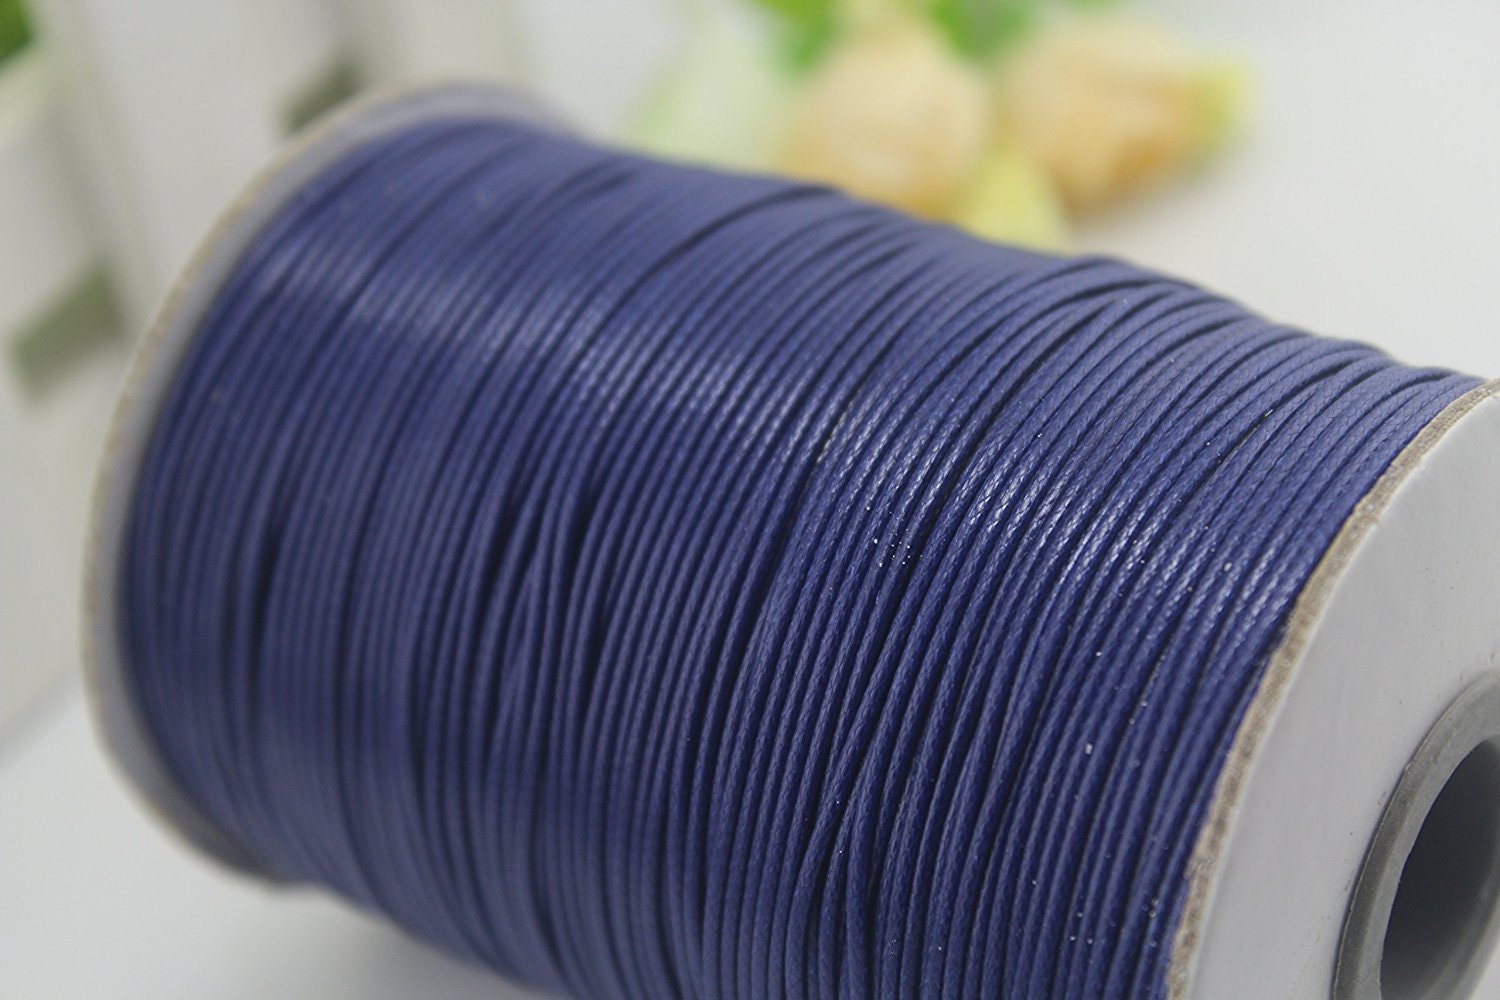 Korea Wax Cord,1mm Blue Waxed Polyester Cord,braided Thread Wax Rope  Macrame Cord Beading String Bracelets Necklace Jewelry Making 20 Yards 